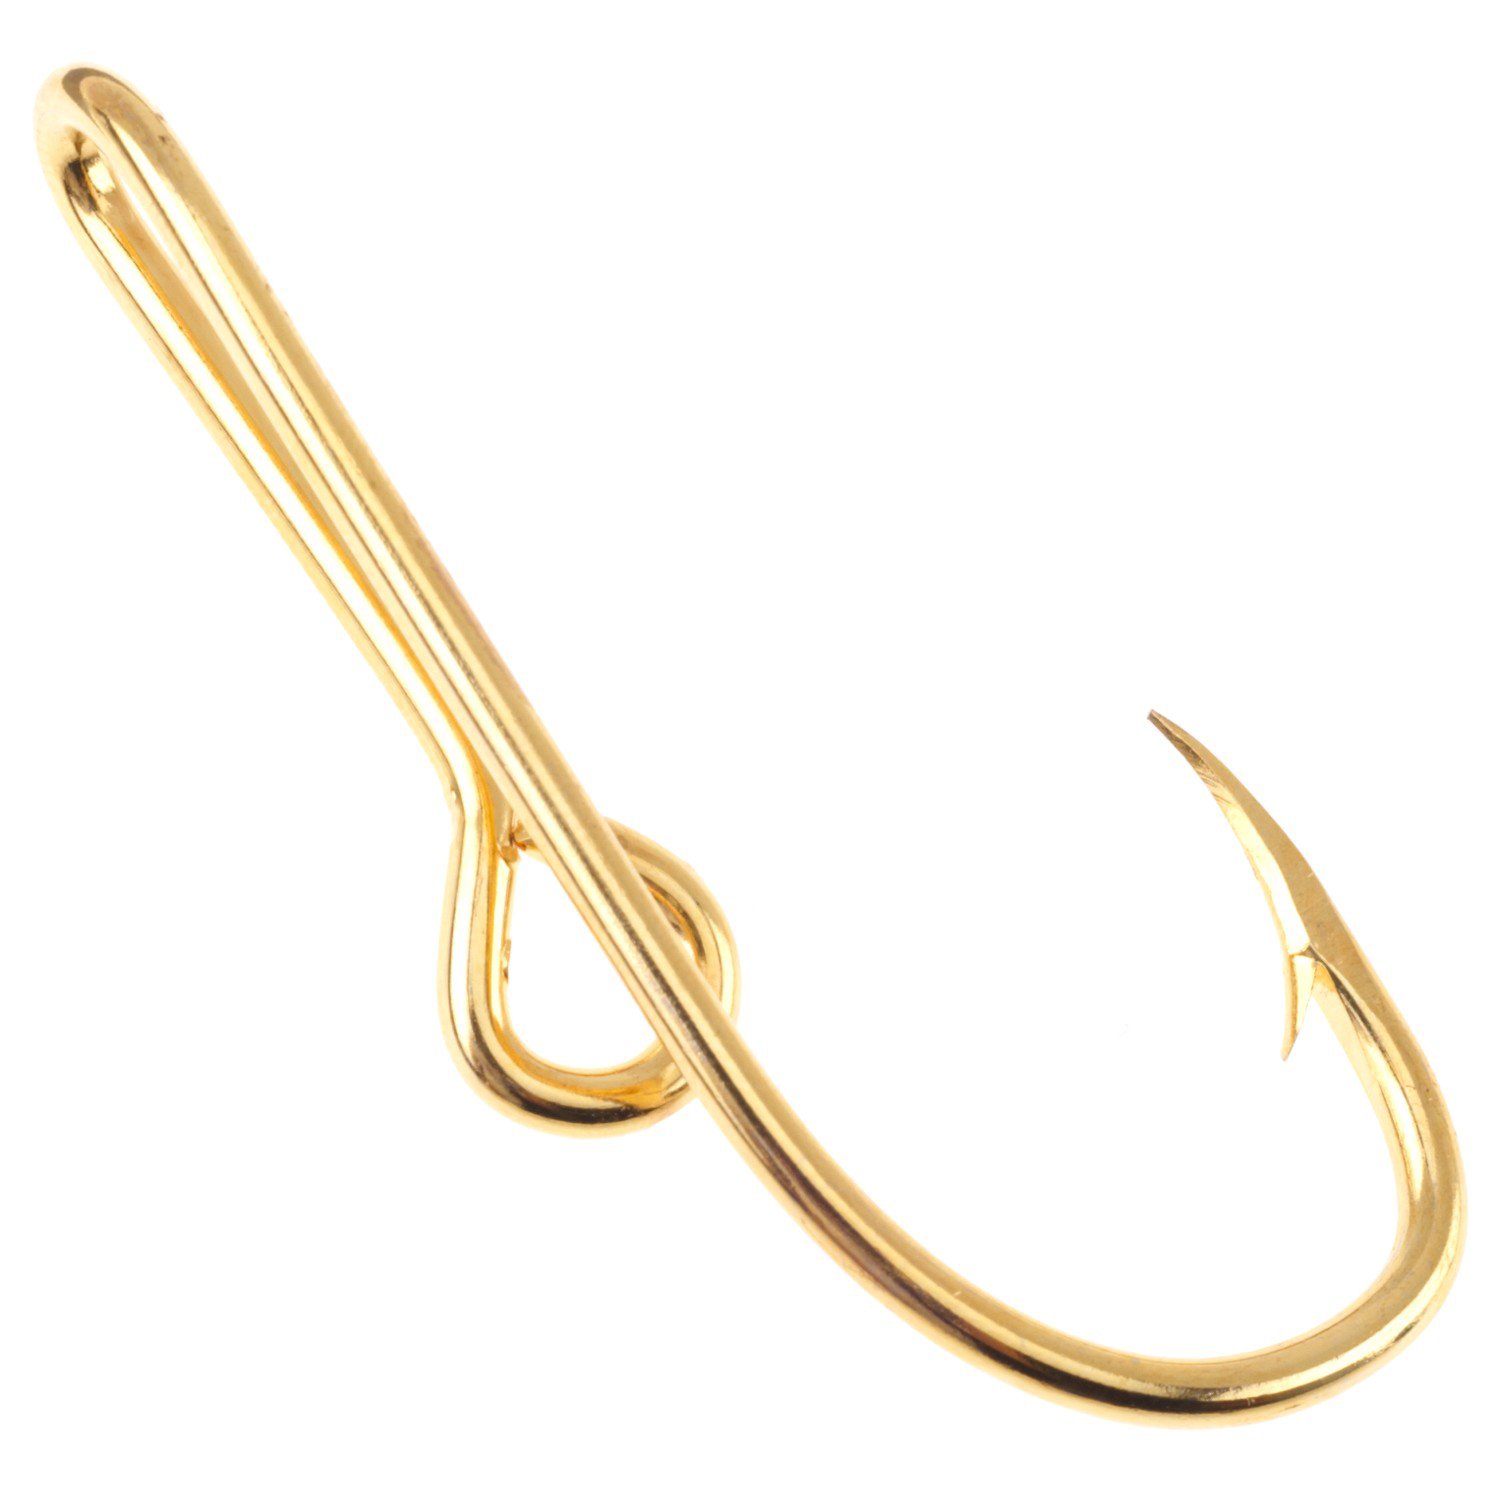 Eagle Claw Hat/Tie Clasp Hook